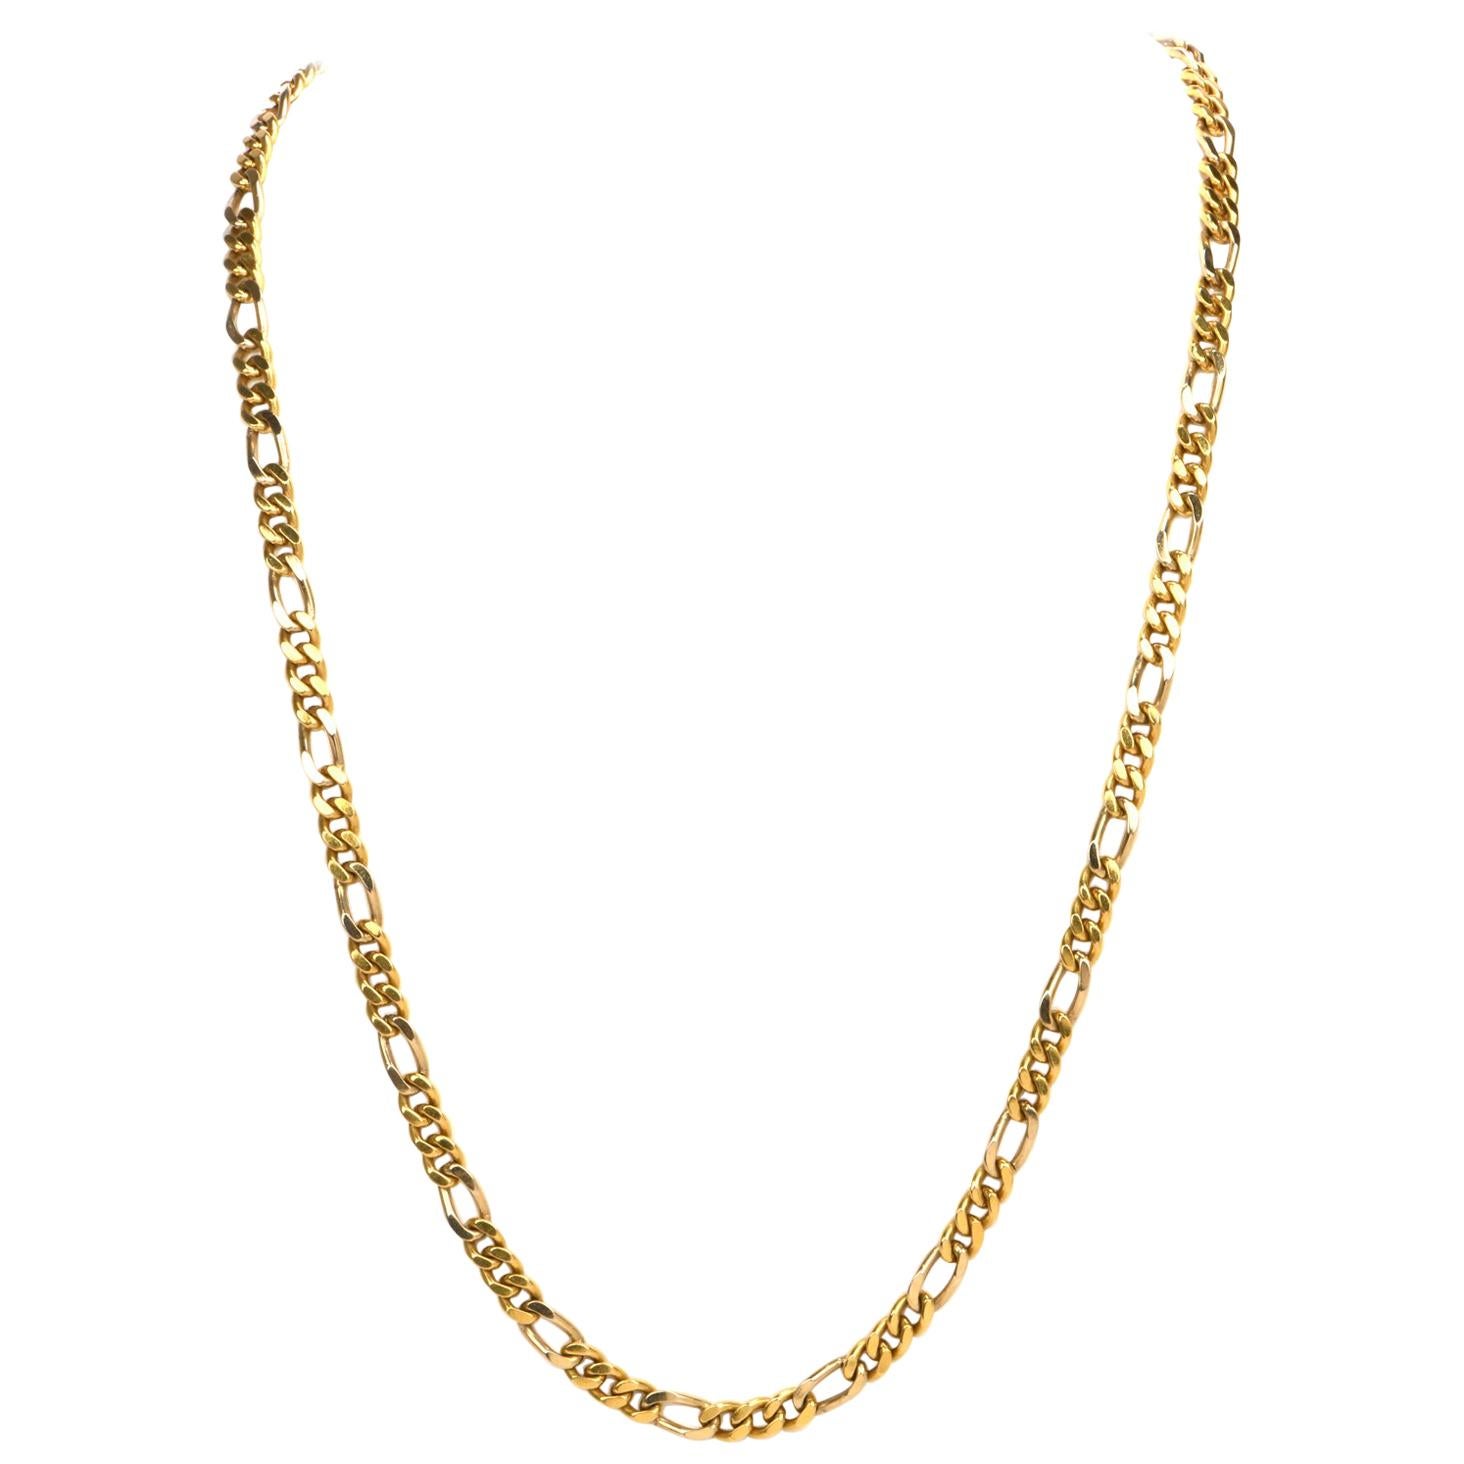 Vintage 1970s Heavy Figaro Gold Long Chain Necklace